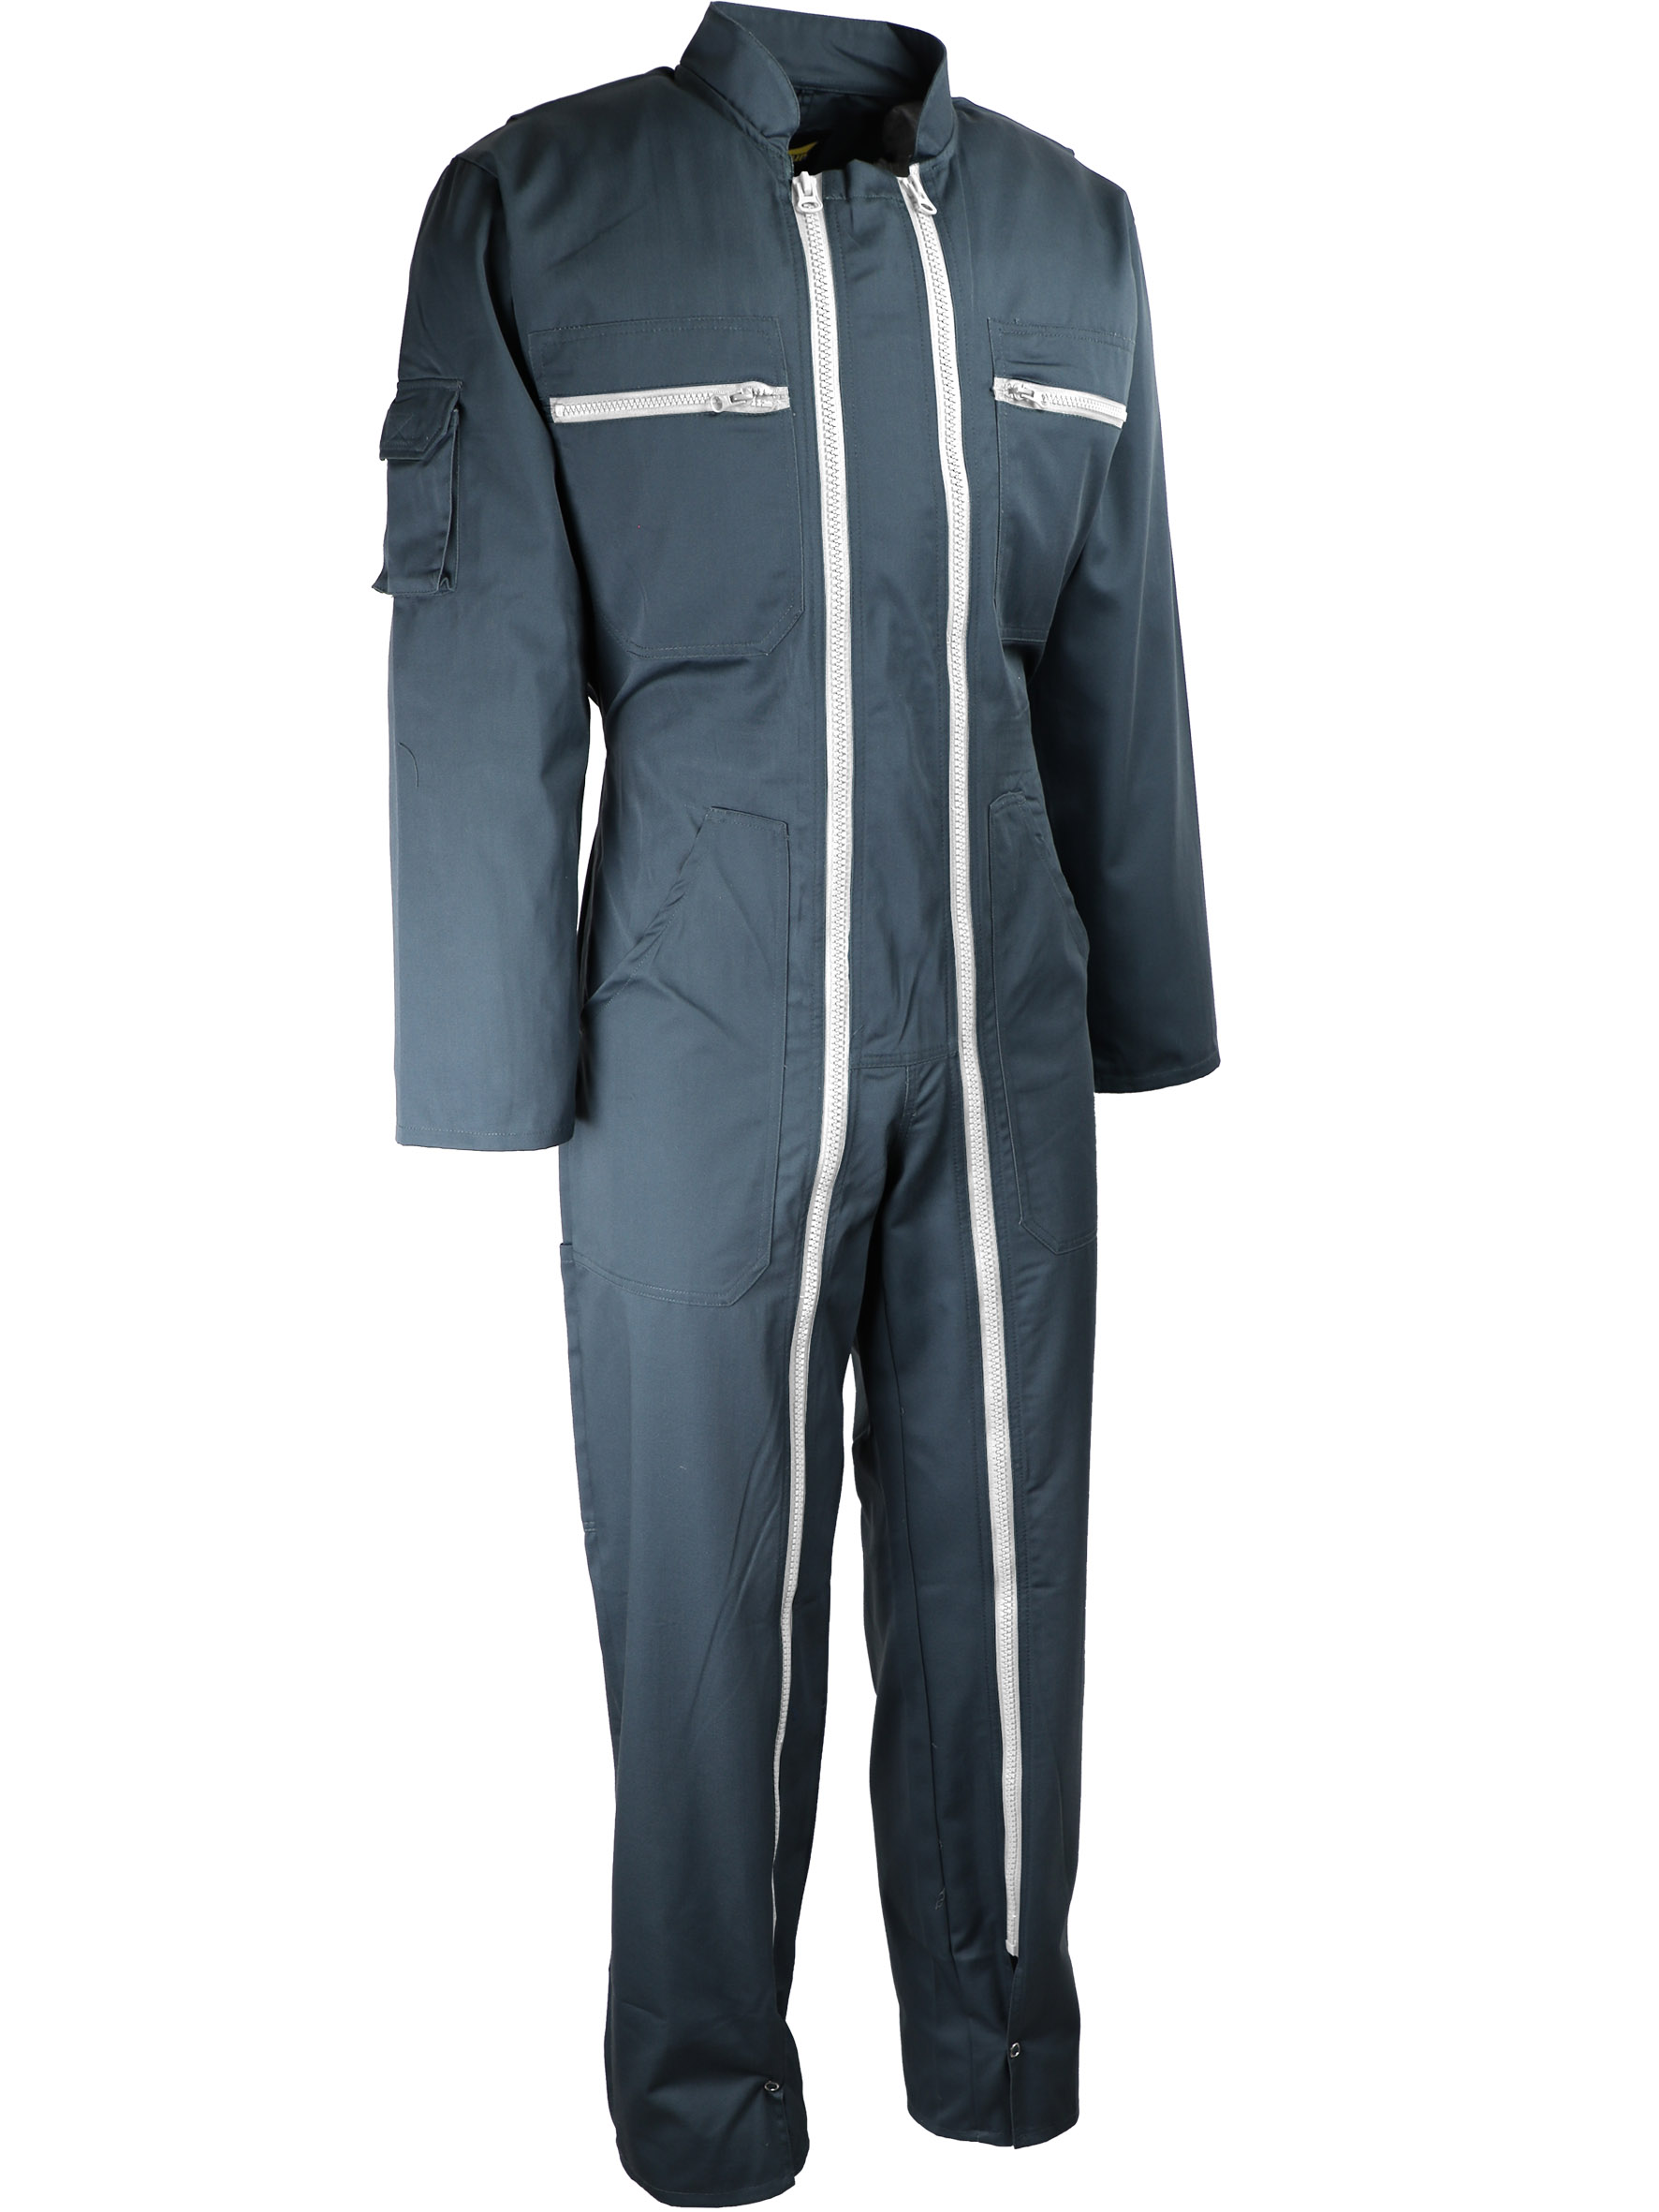 Overall  Double Zip Work Overall Boiler Suit Coverall workwear suit Poly cotton